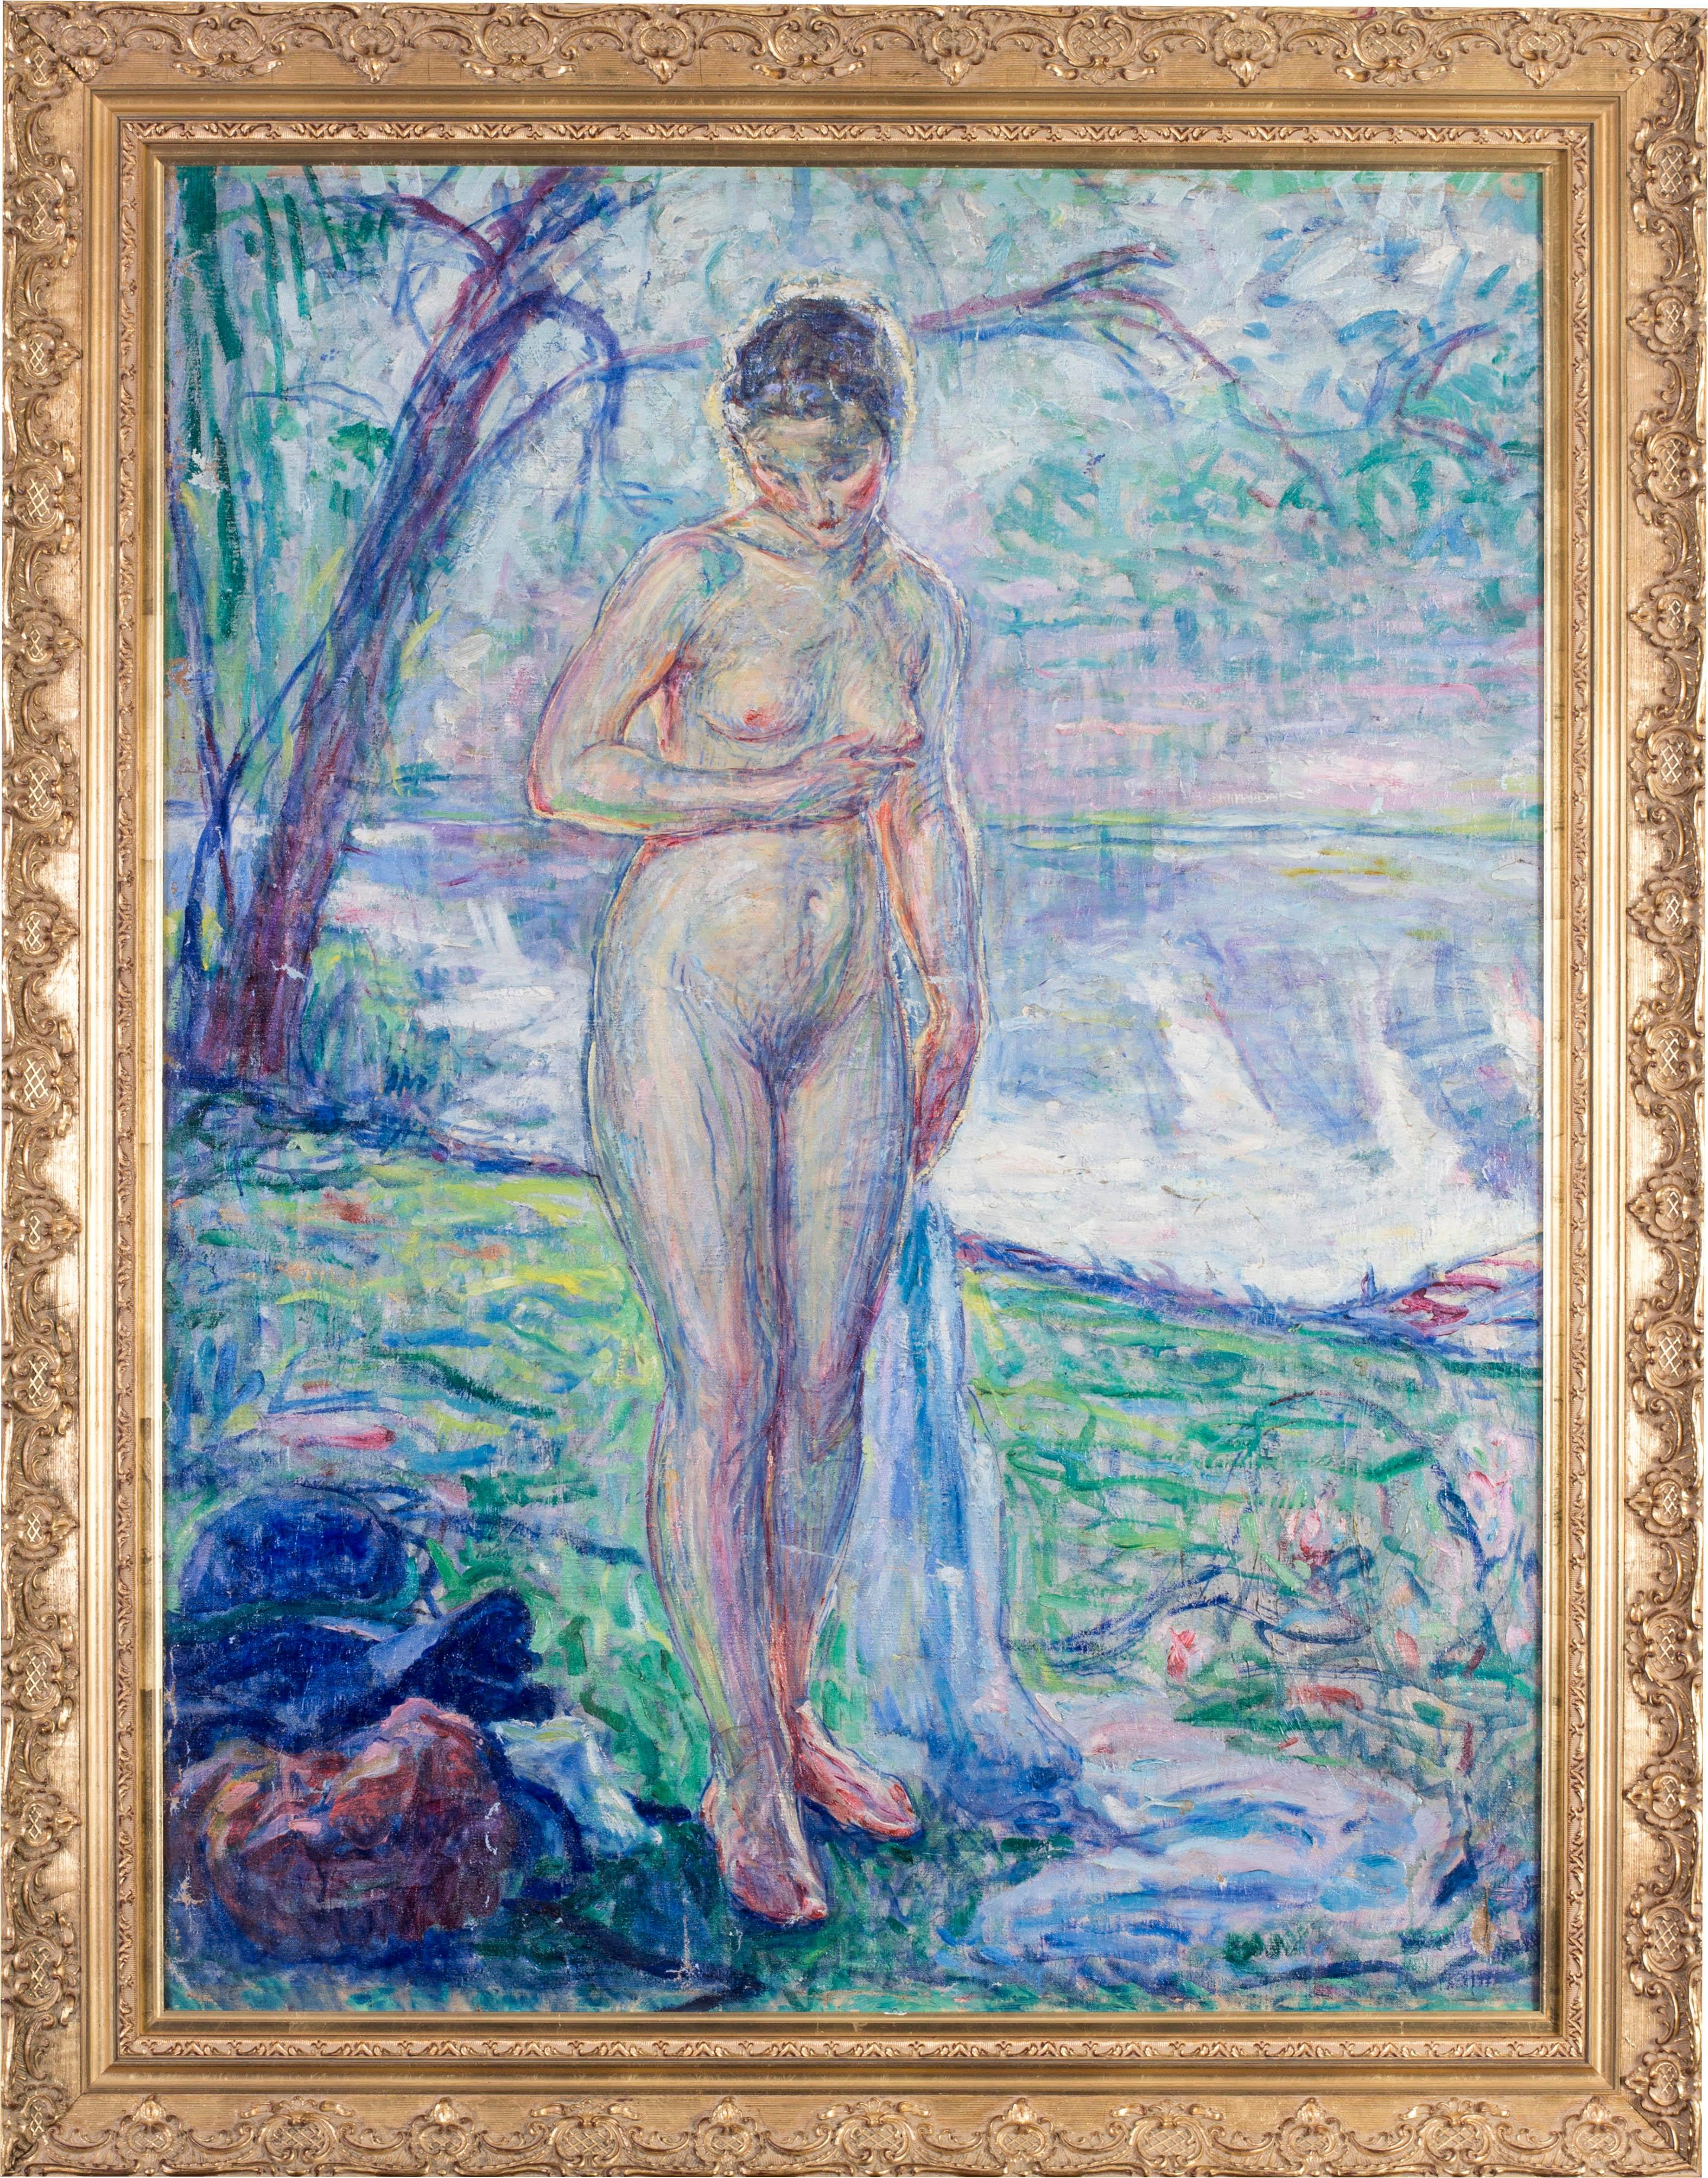 William Malherbe (French, 1884-1955)
La Baigneuses au riviere
Oil on canvas
Signed on the reverse with studio stamp
40.1/4 x 30.1/4 in. (102.3 x 77 cm.)

William Malherbe was a French Post Impressionist painter born in 1884. His success came in the